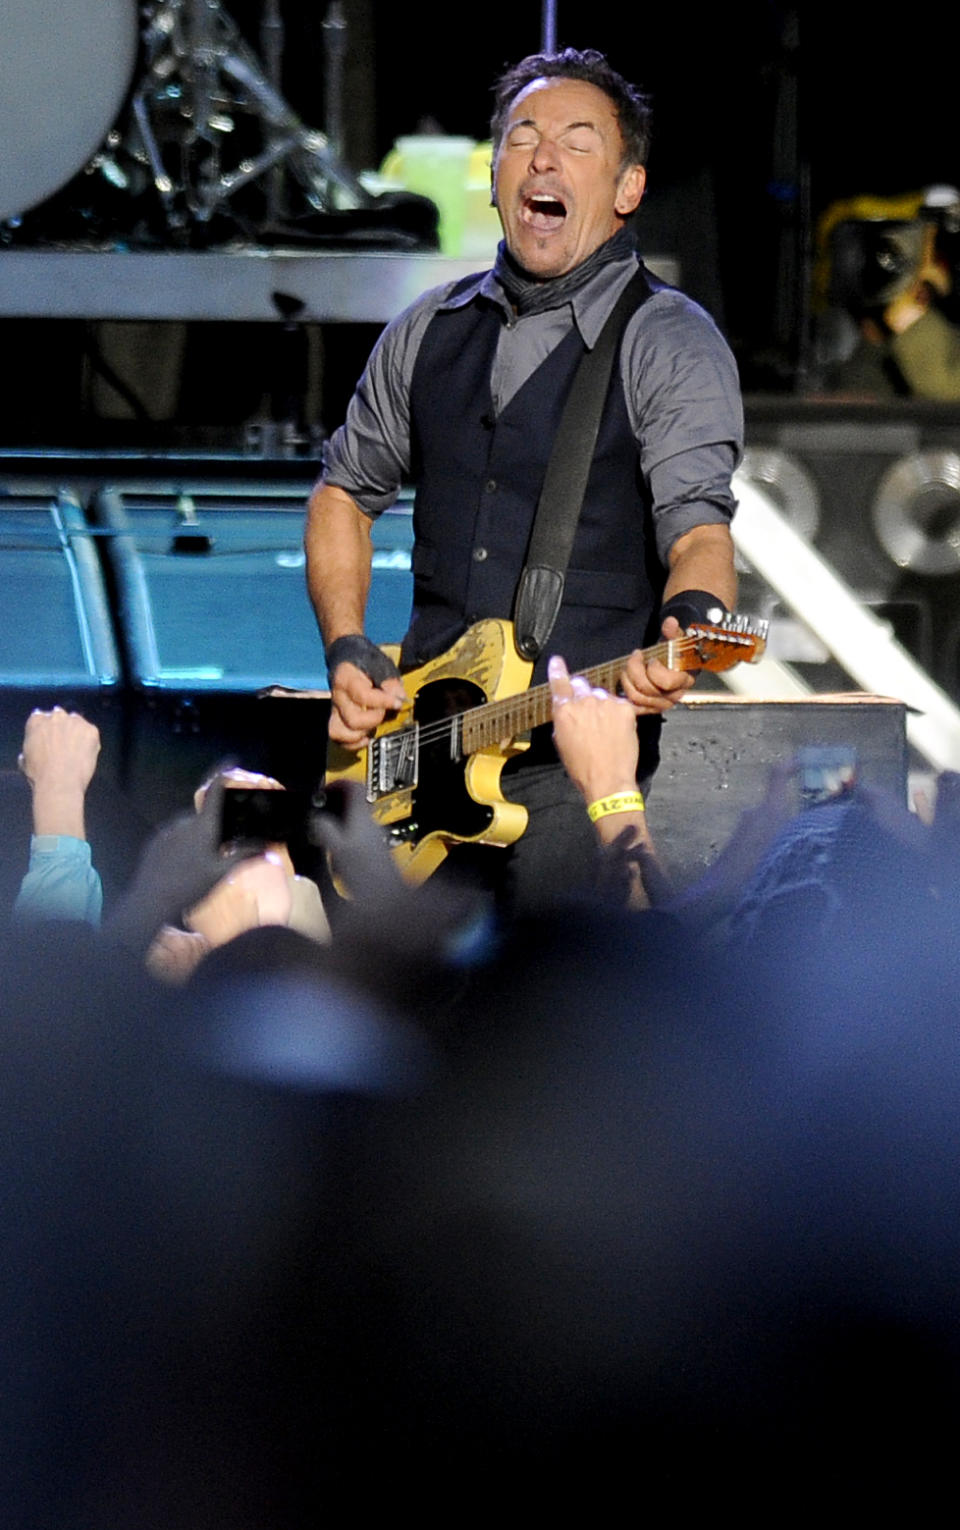 Bruce Springsteen performs with the E Street Band during the 2014 NCAA March Madness Music Festival - Capital One JamFest, Sunday, April 6, 2014, in Dallas. (Photo by Matt Strasen/Invision/AP)